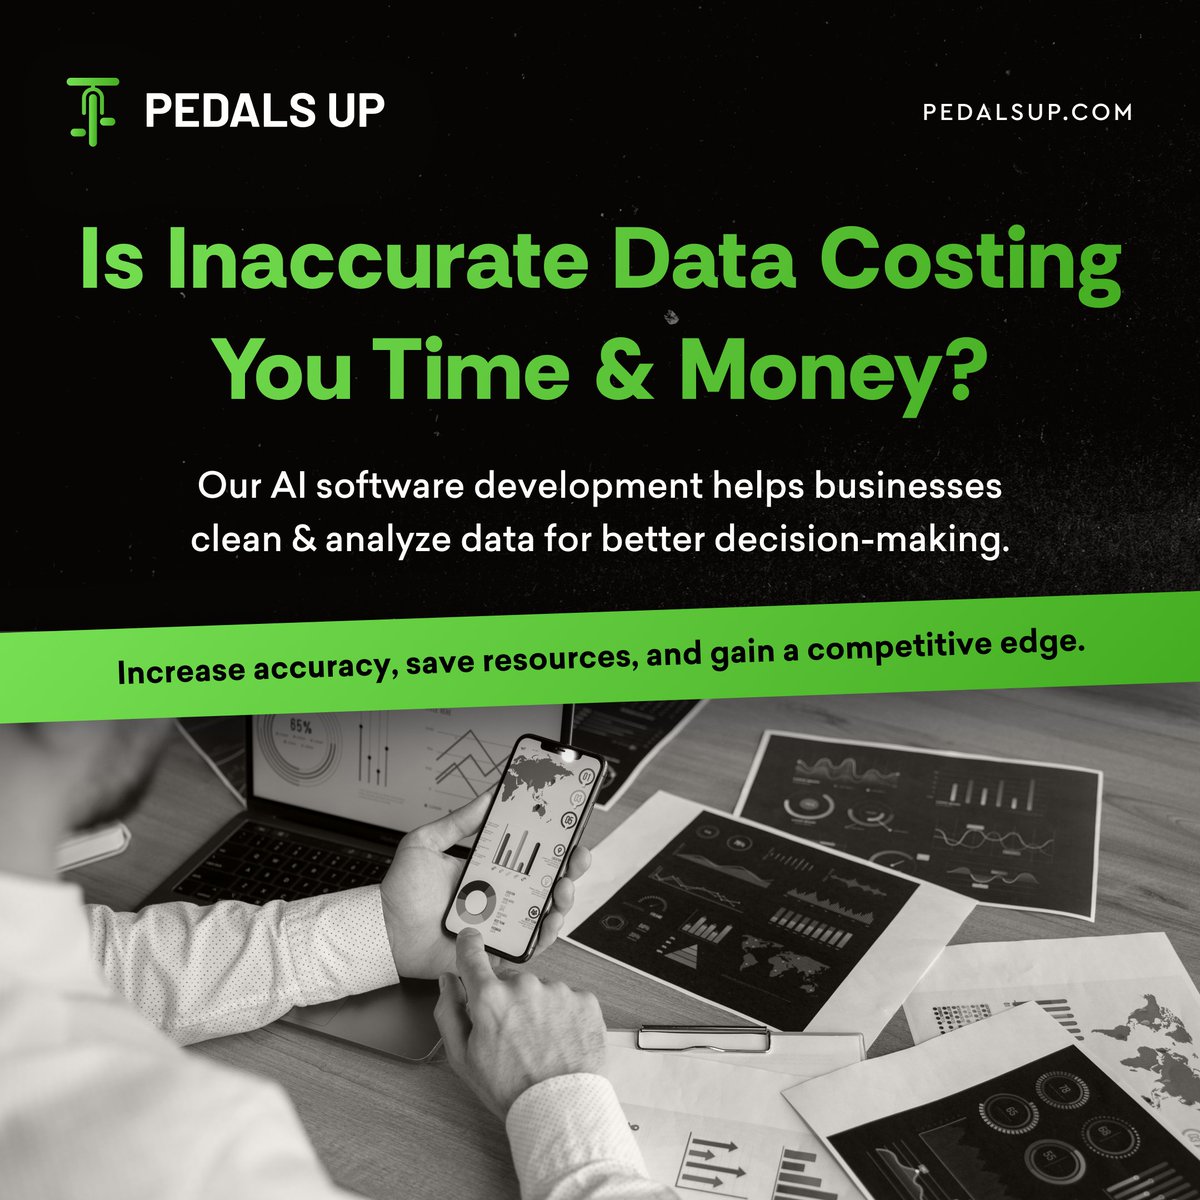 Drowning in inaccurate data? Our AI solution cleans and analyzes data for smarter decisions. Stop wasting time and money and get the edge for your business with Pedals Up.
#pedalsup #dataanalysis #ai #cleandata #aidevelopment #mobiledevelopment #softwarecompany #SoftwareSolutions